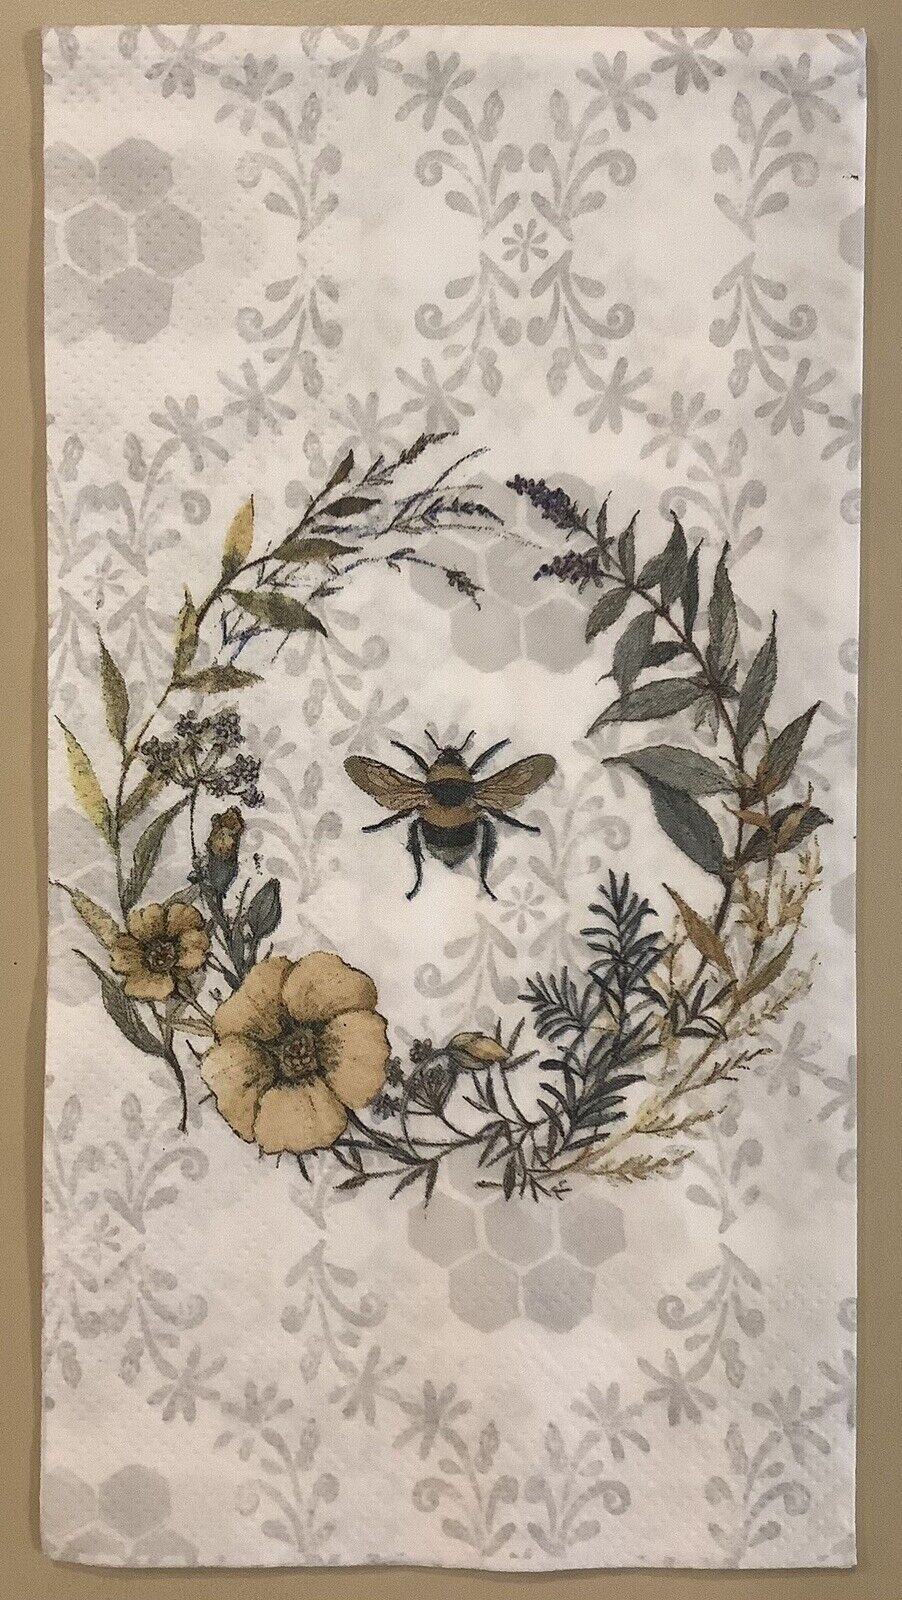 TWO Honey Bee Flowers Floral Wreath Paper Napkins Decoupage Hostess Yellow